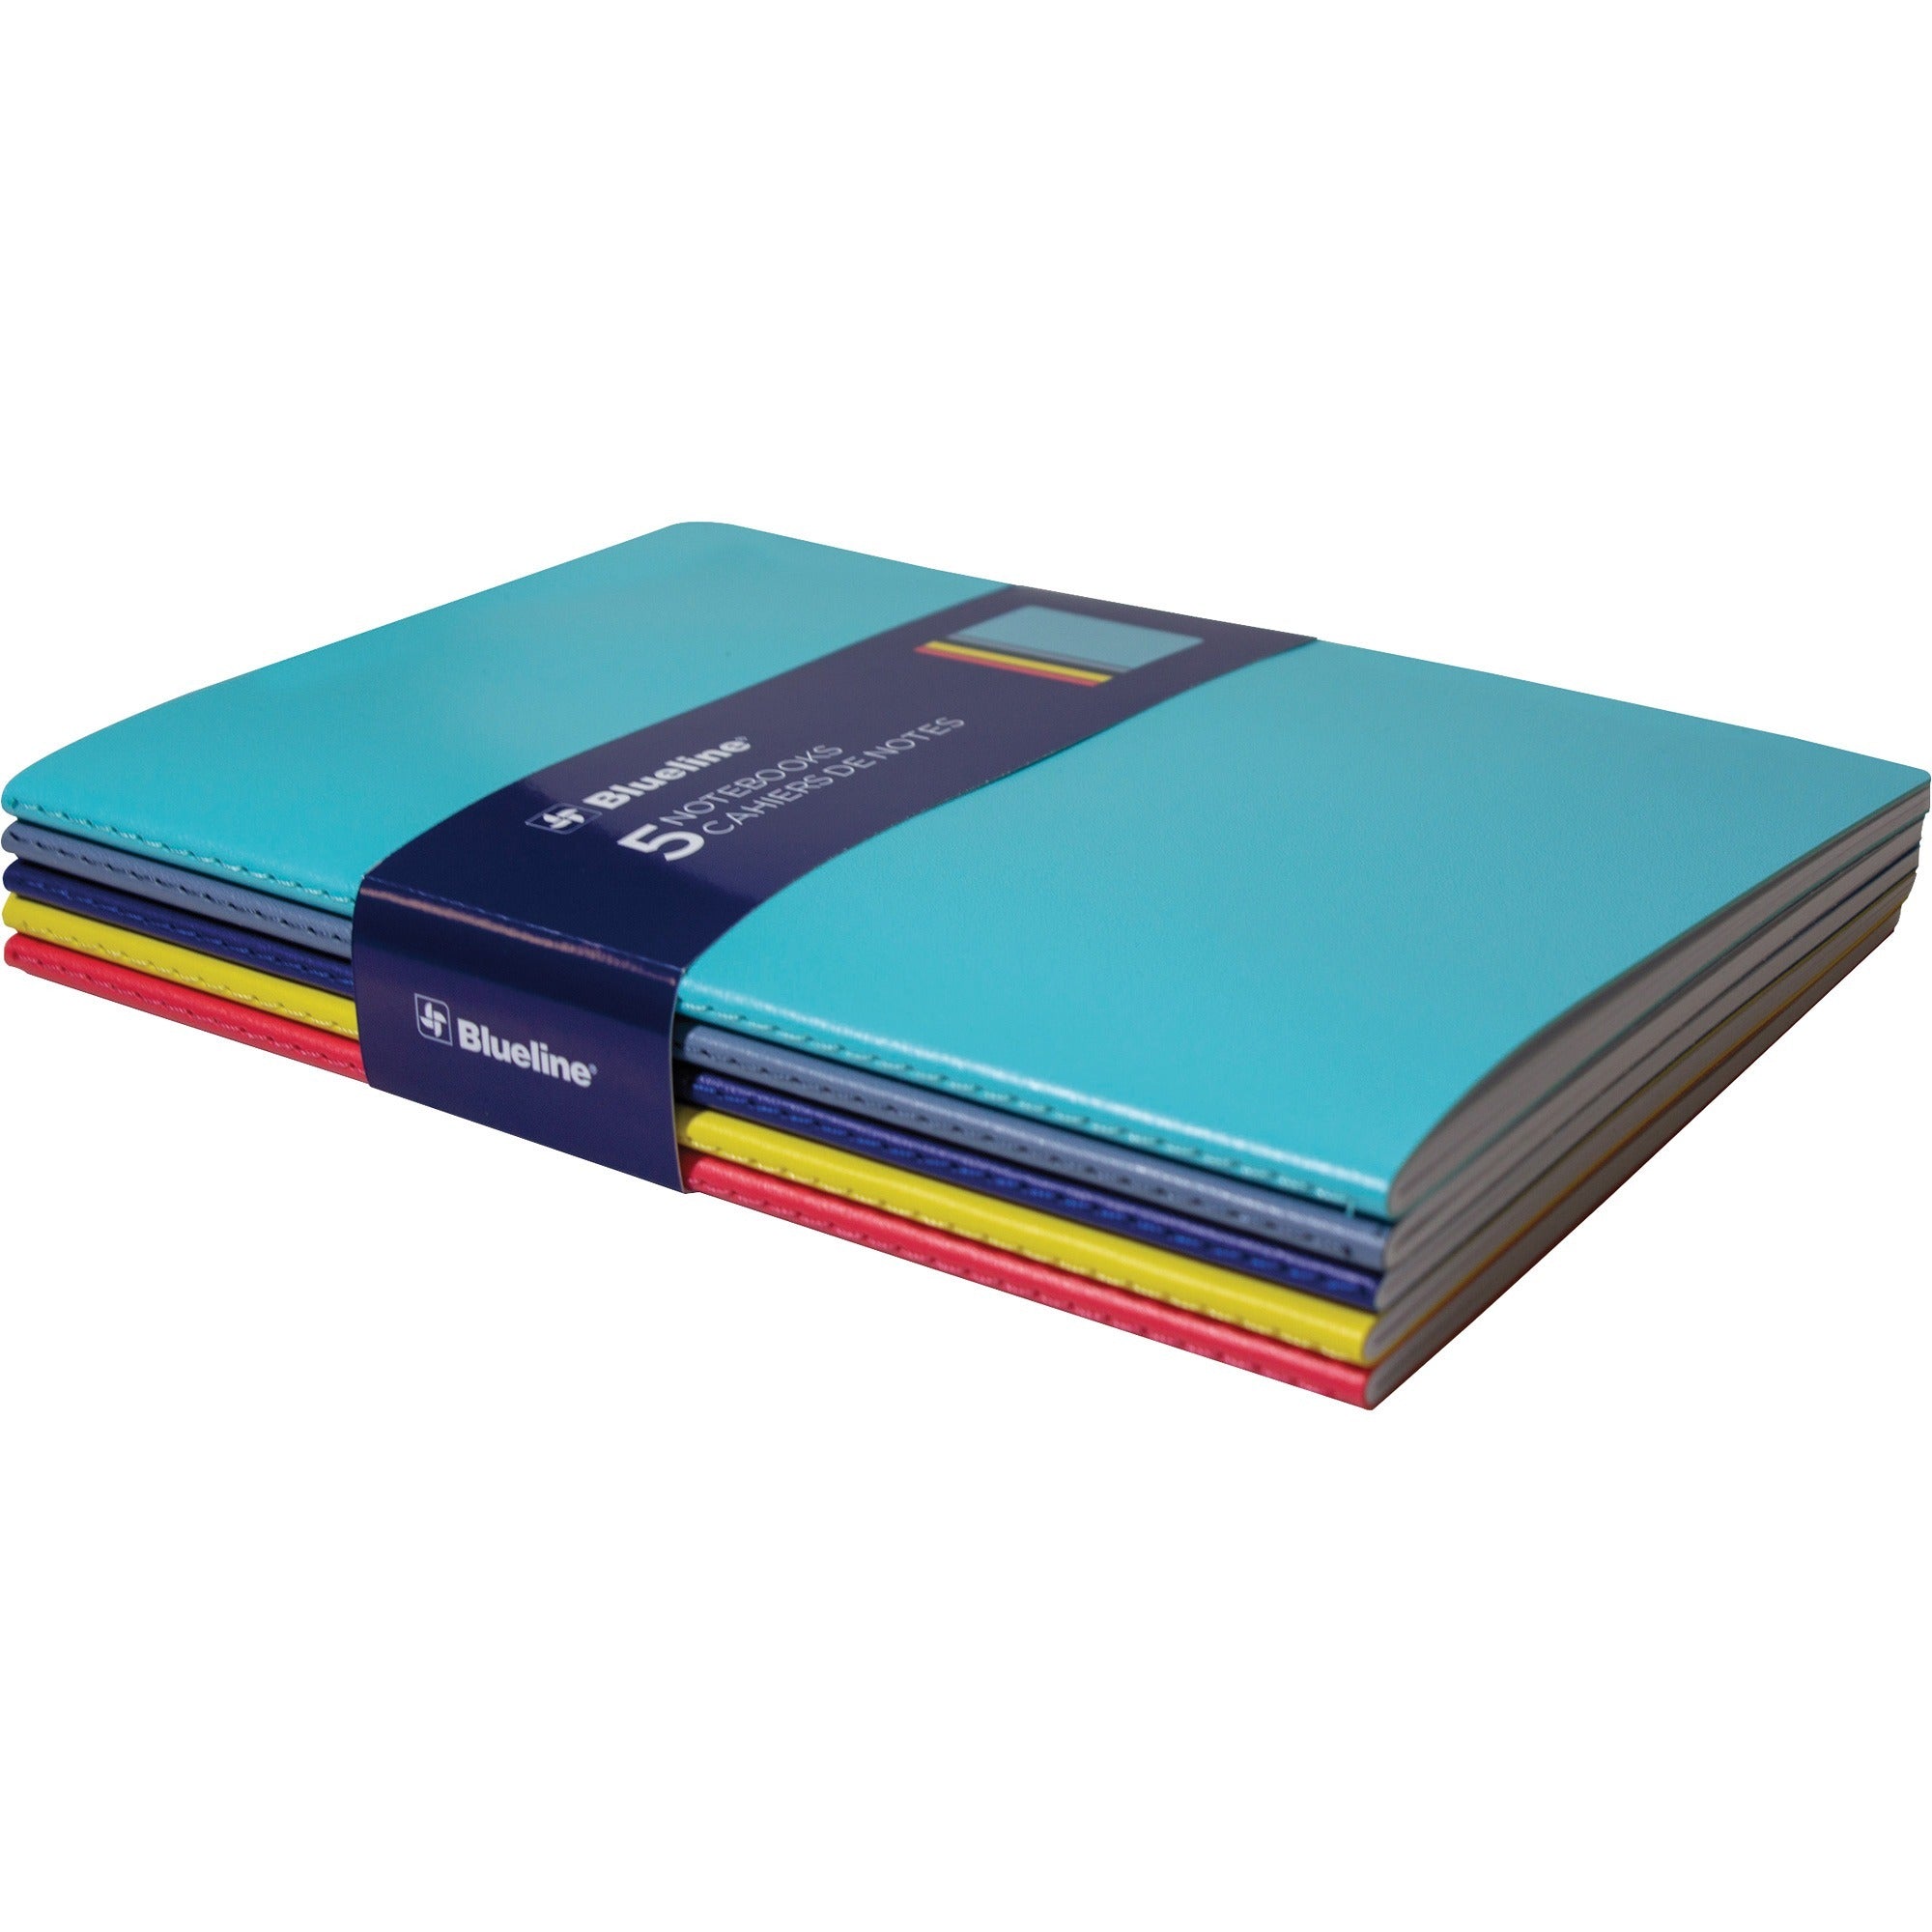 rediform-blueline-5-notebooks-pack-64-pages-sewn-5-3-4-x-8-1-4-assorted-cover-soft-cover-flexible-cover-bleed-resistant-5-pack_reda85 - 1